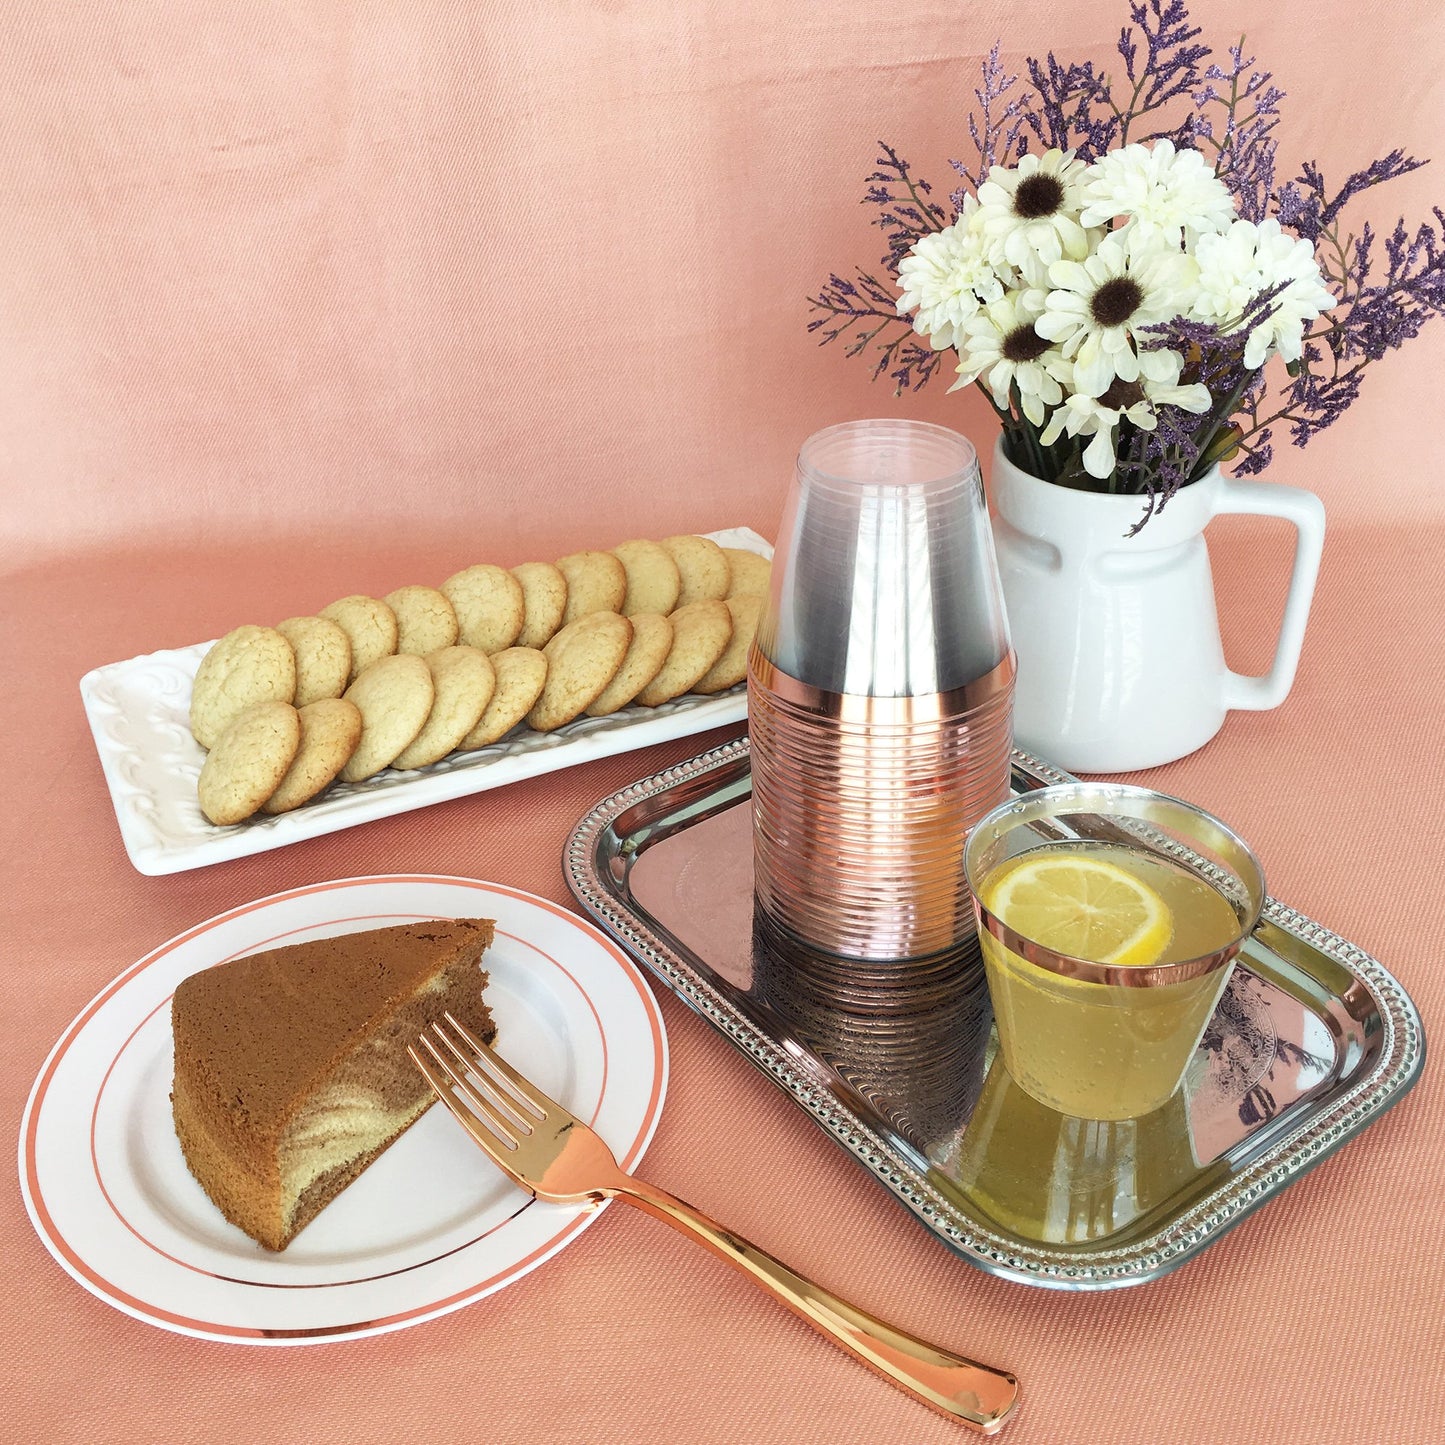 JL Prime 50 Piece Rose Gold Plastic Plates for 25 Guests, Heavy Duty Reusable Disposable Plastic Plates with Rose Gold Rim for Party and Wedding with 25 Dinner Plates and 25 Salad Plates